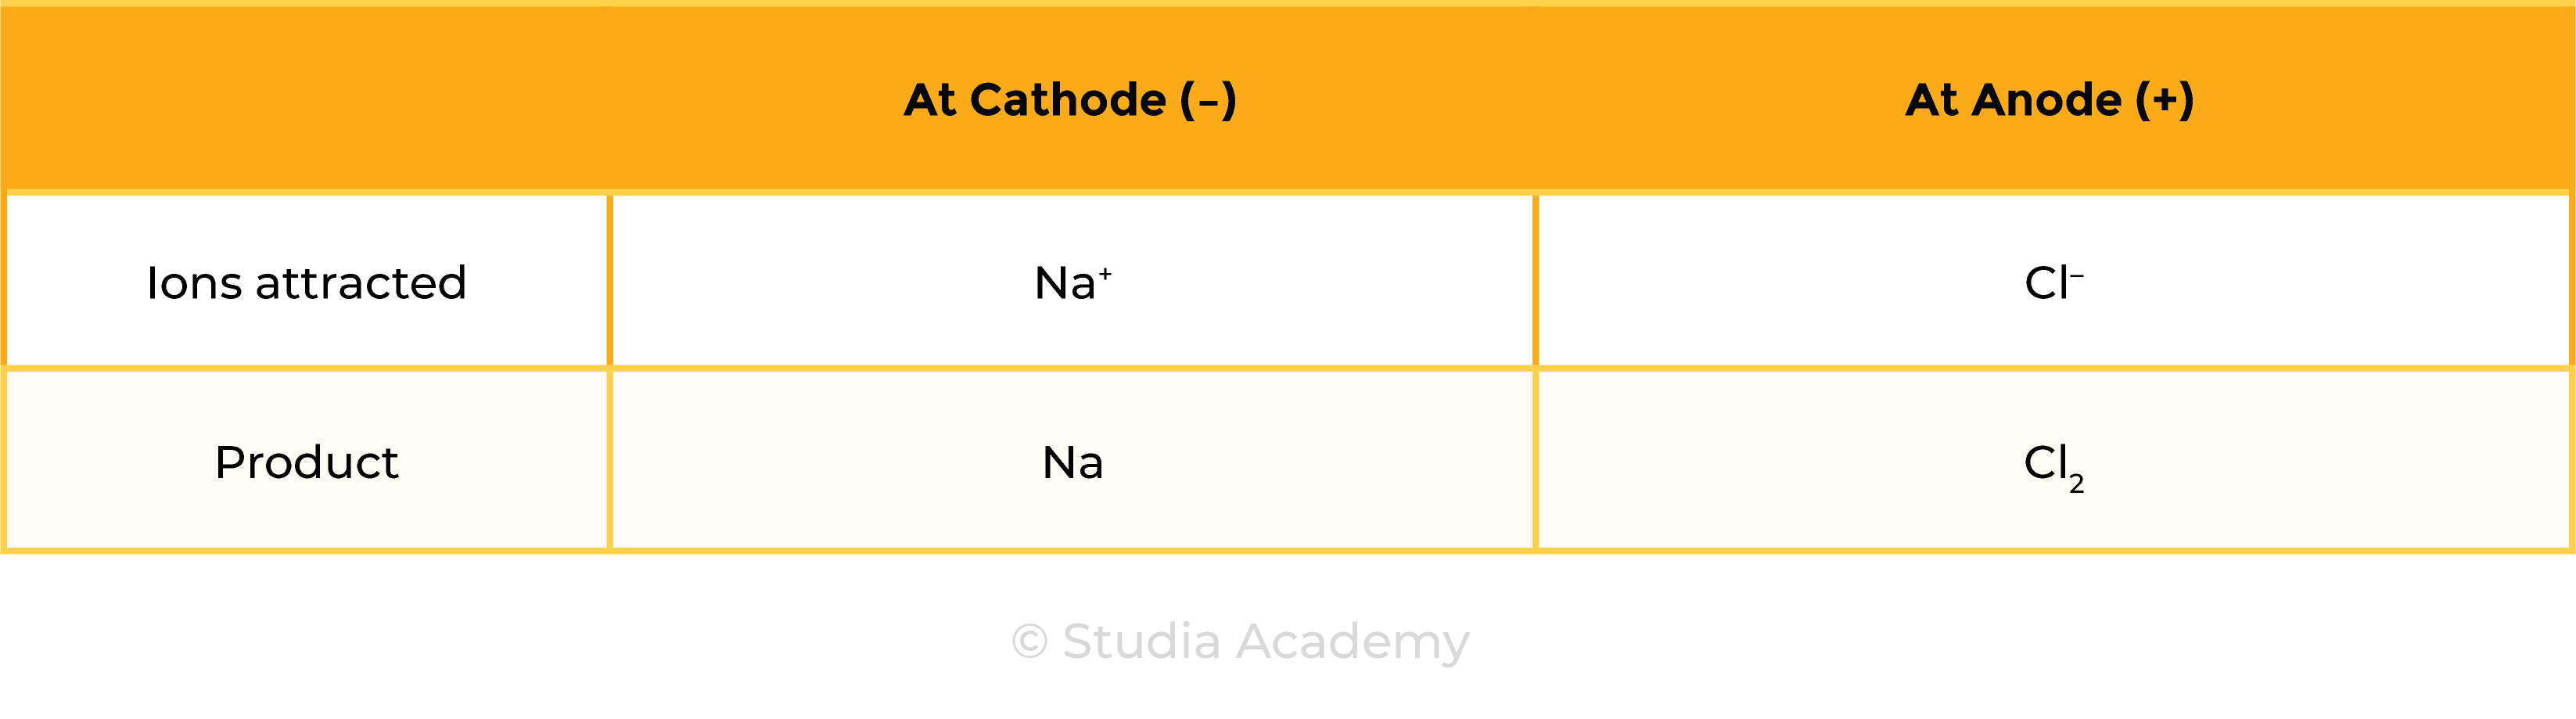 edexcel_igcse_chemistry_topic 09 tables_electrolysis_002_molten ionic compound of NaCl